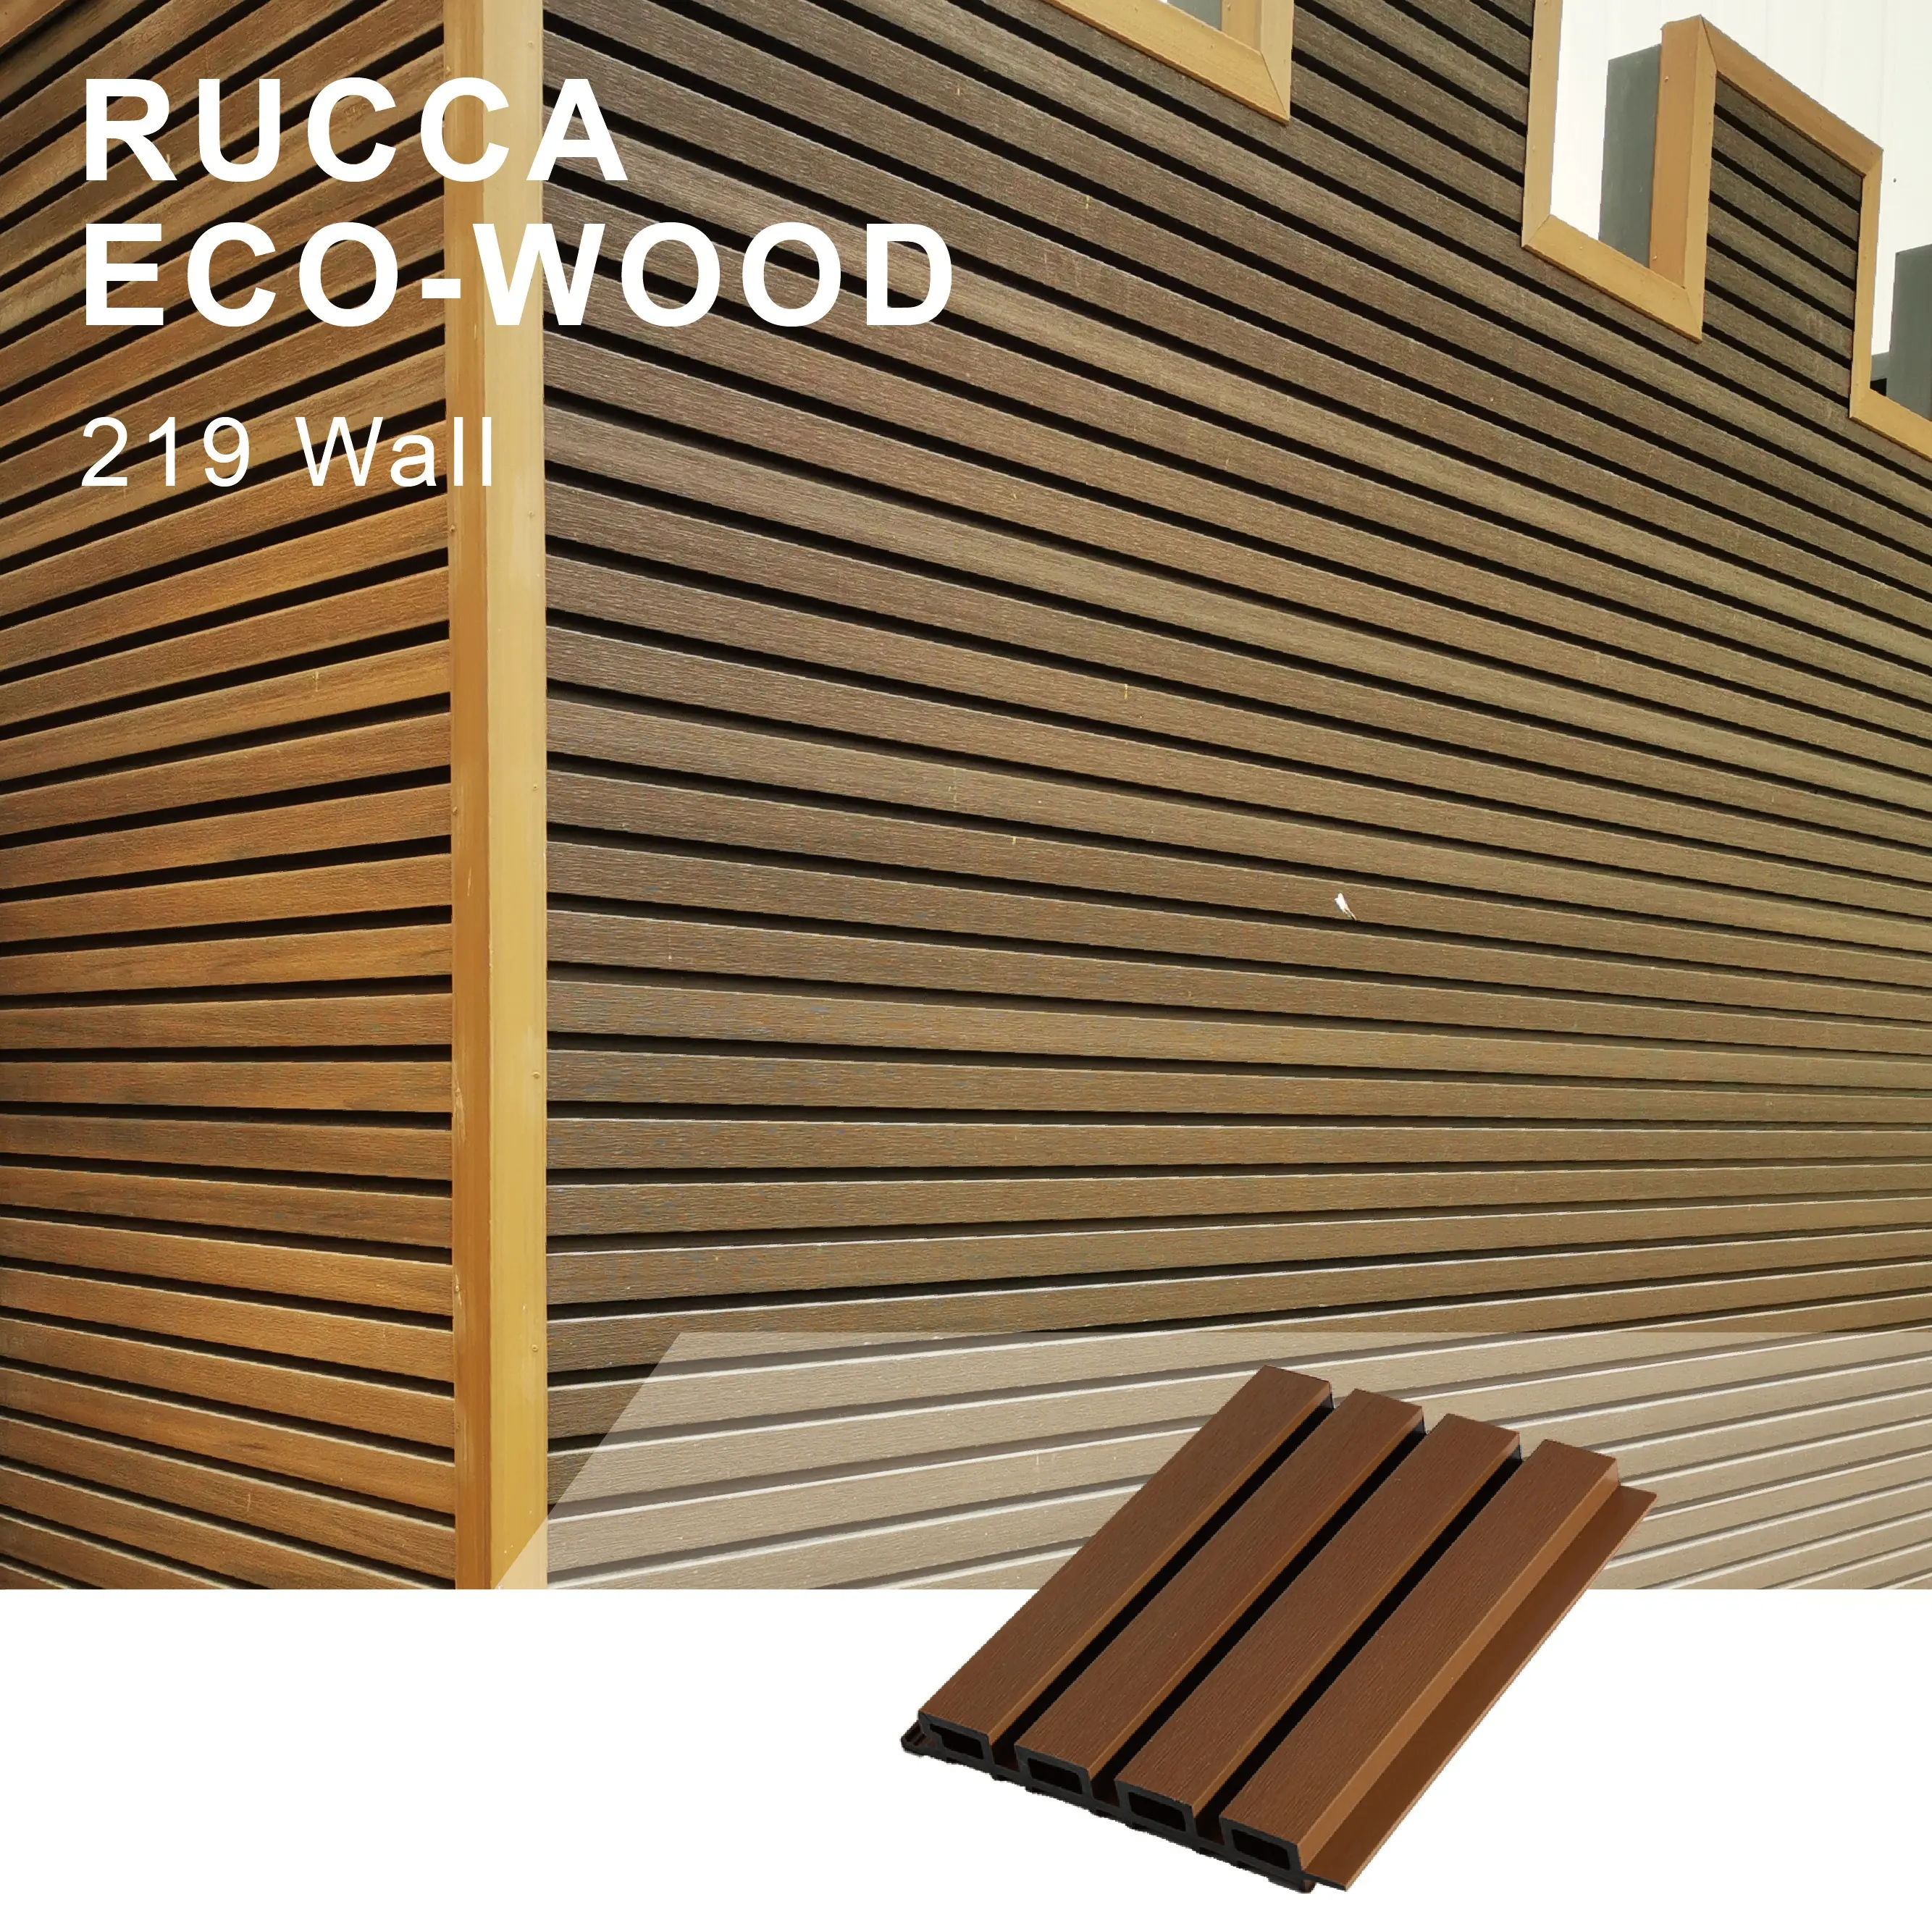 Rucca Luxury WPC Exterior Outdoor Decorative Wall Cladding Panel Design Coextrusion Panel Wooden Siding Board Building Material